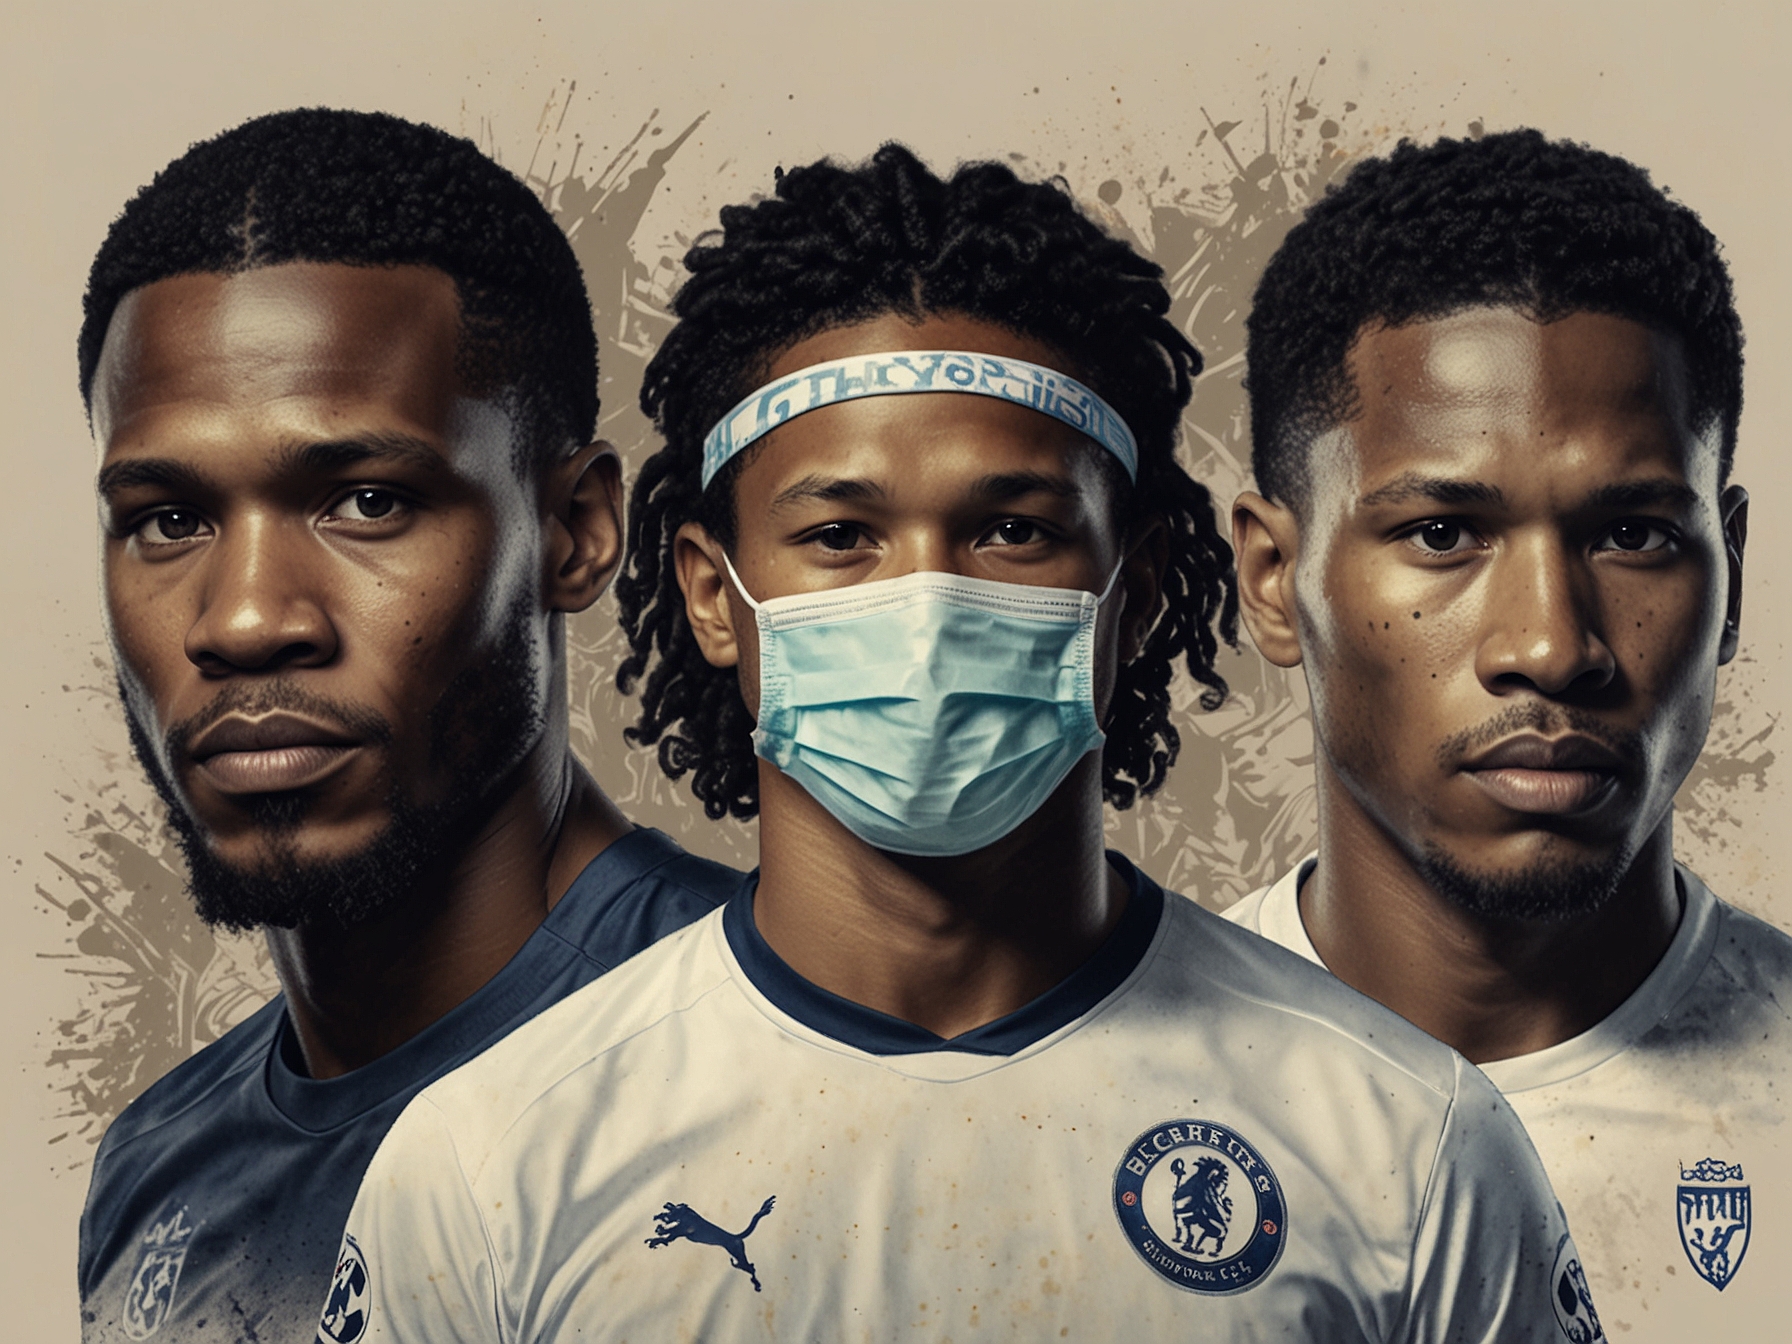 Historical montage of famous football players like Edgar Davids, Antonio Rudiger, and Son Heung-min wearing protective masks, highlighting their successful performances.